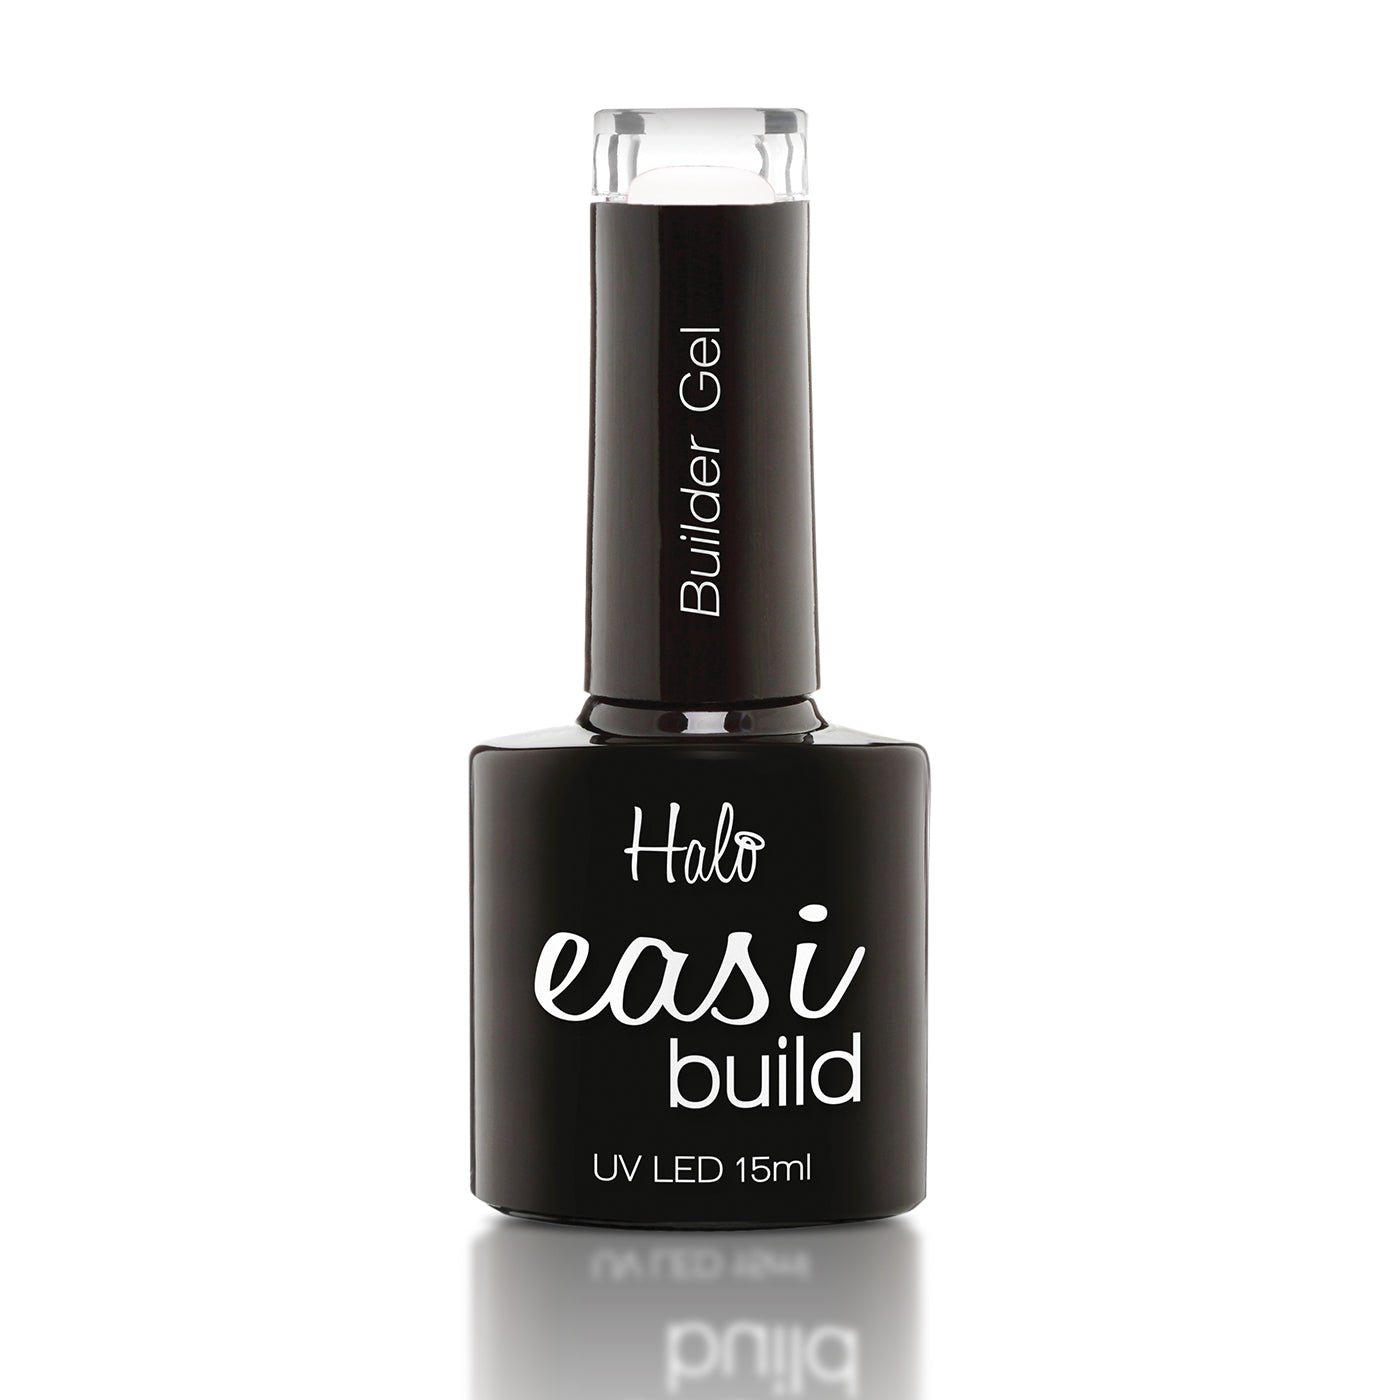 Halo Easi Build Builder Gel - White (15ml) - Ultimate Hair and Beauty